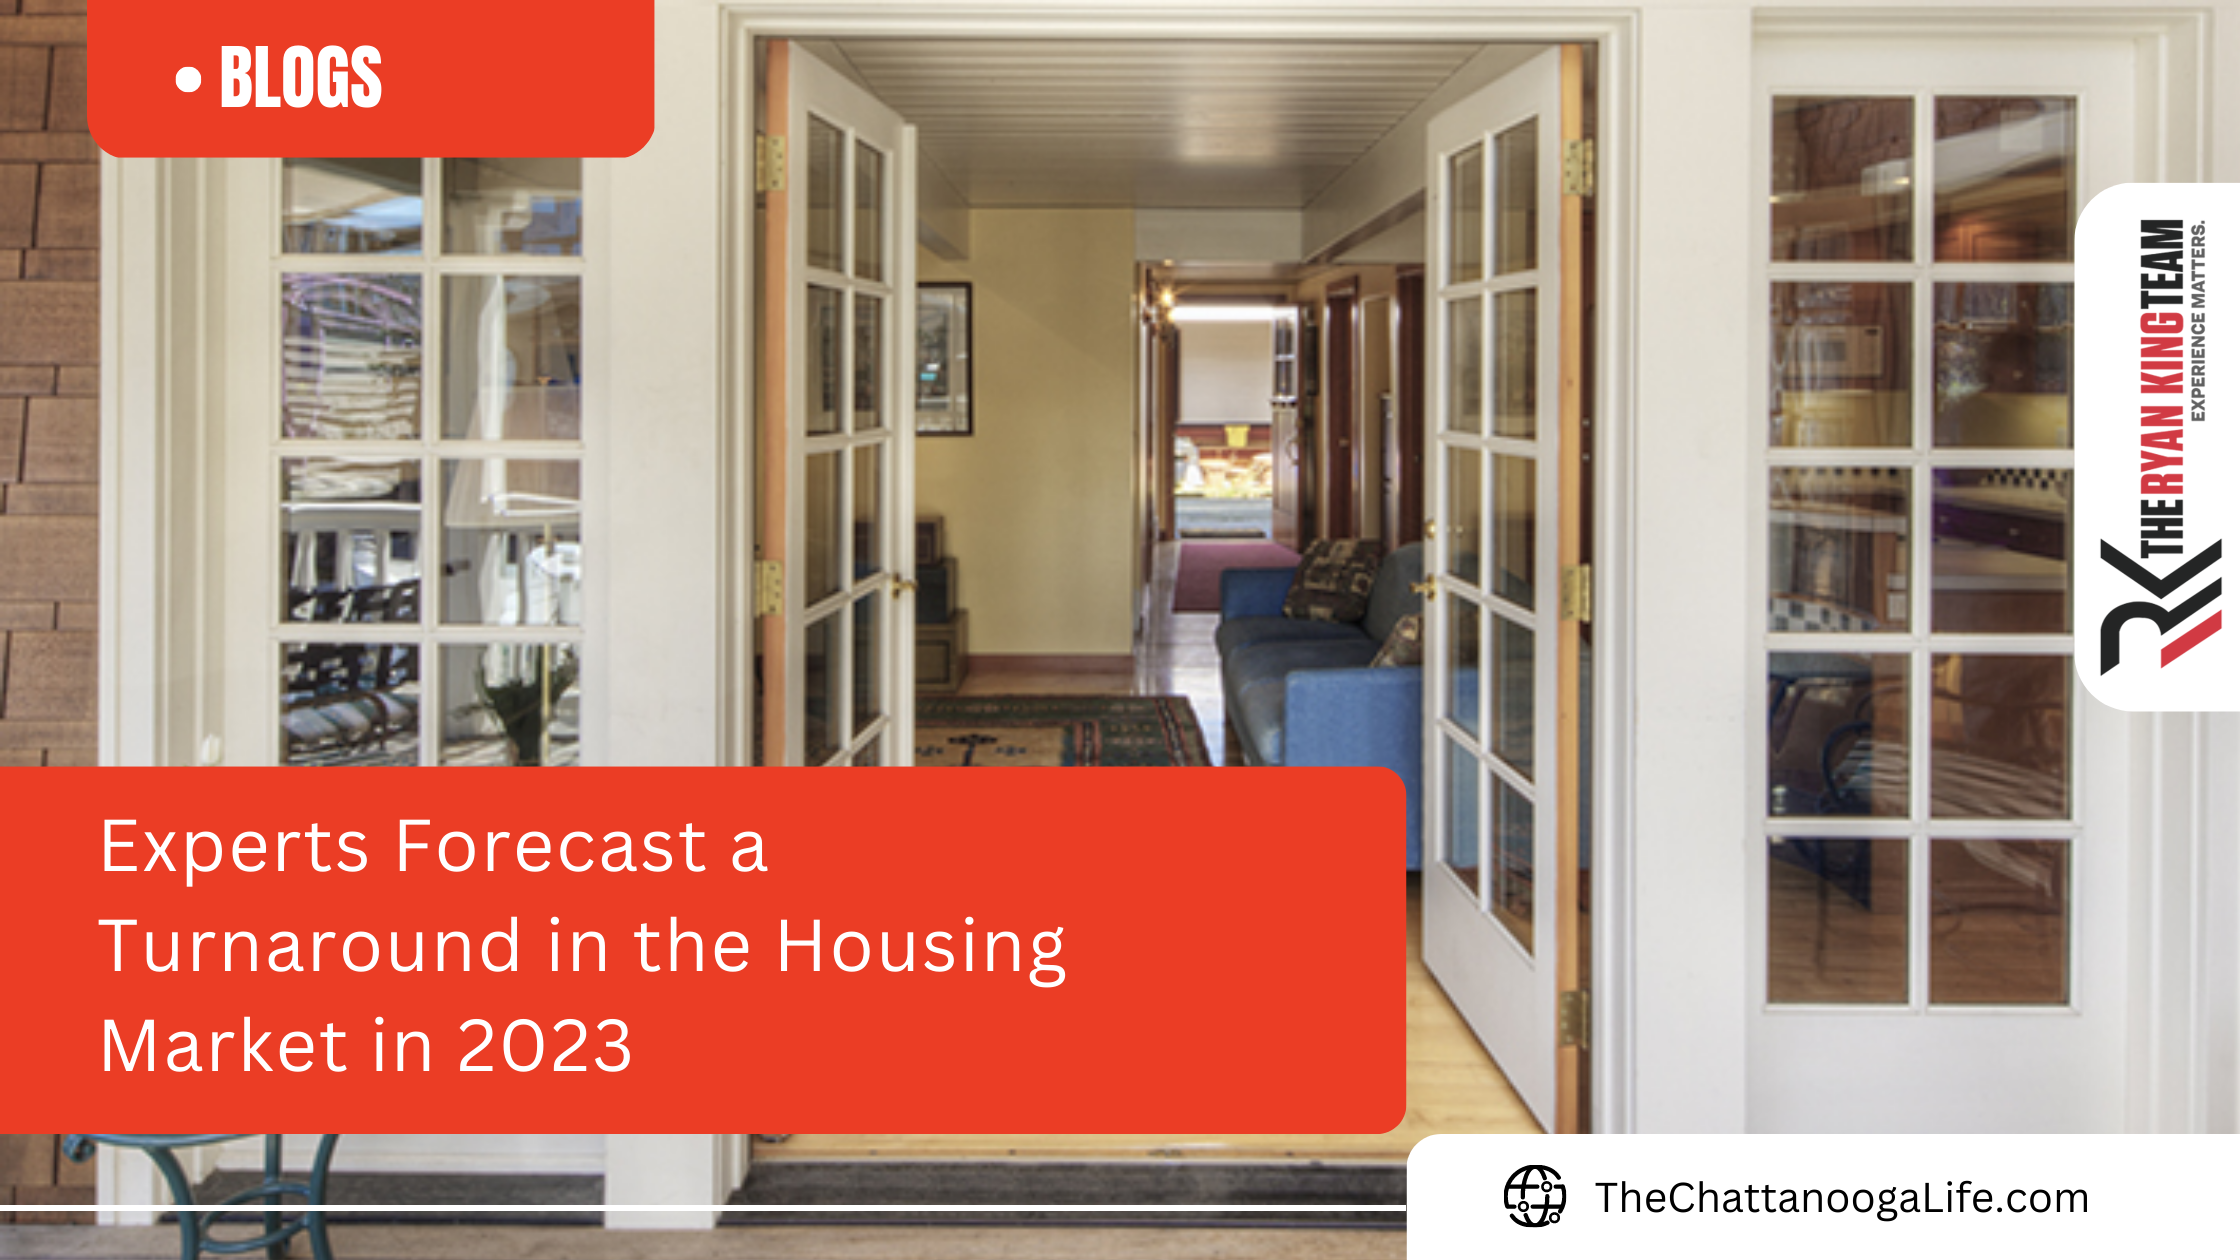 Experts Forecast a Turnaround in the Housing Market in 2023